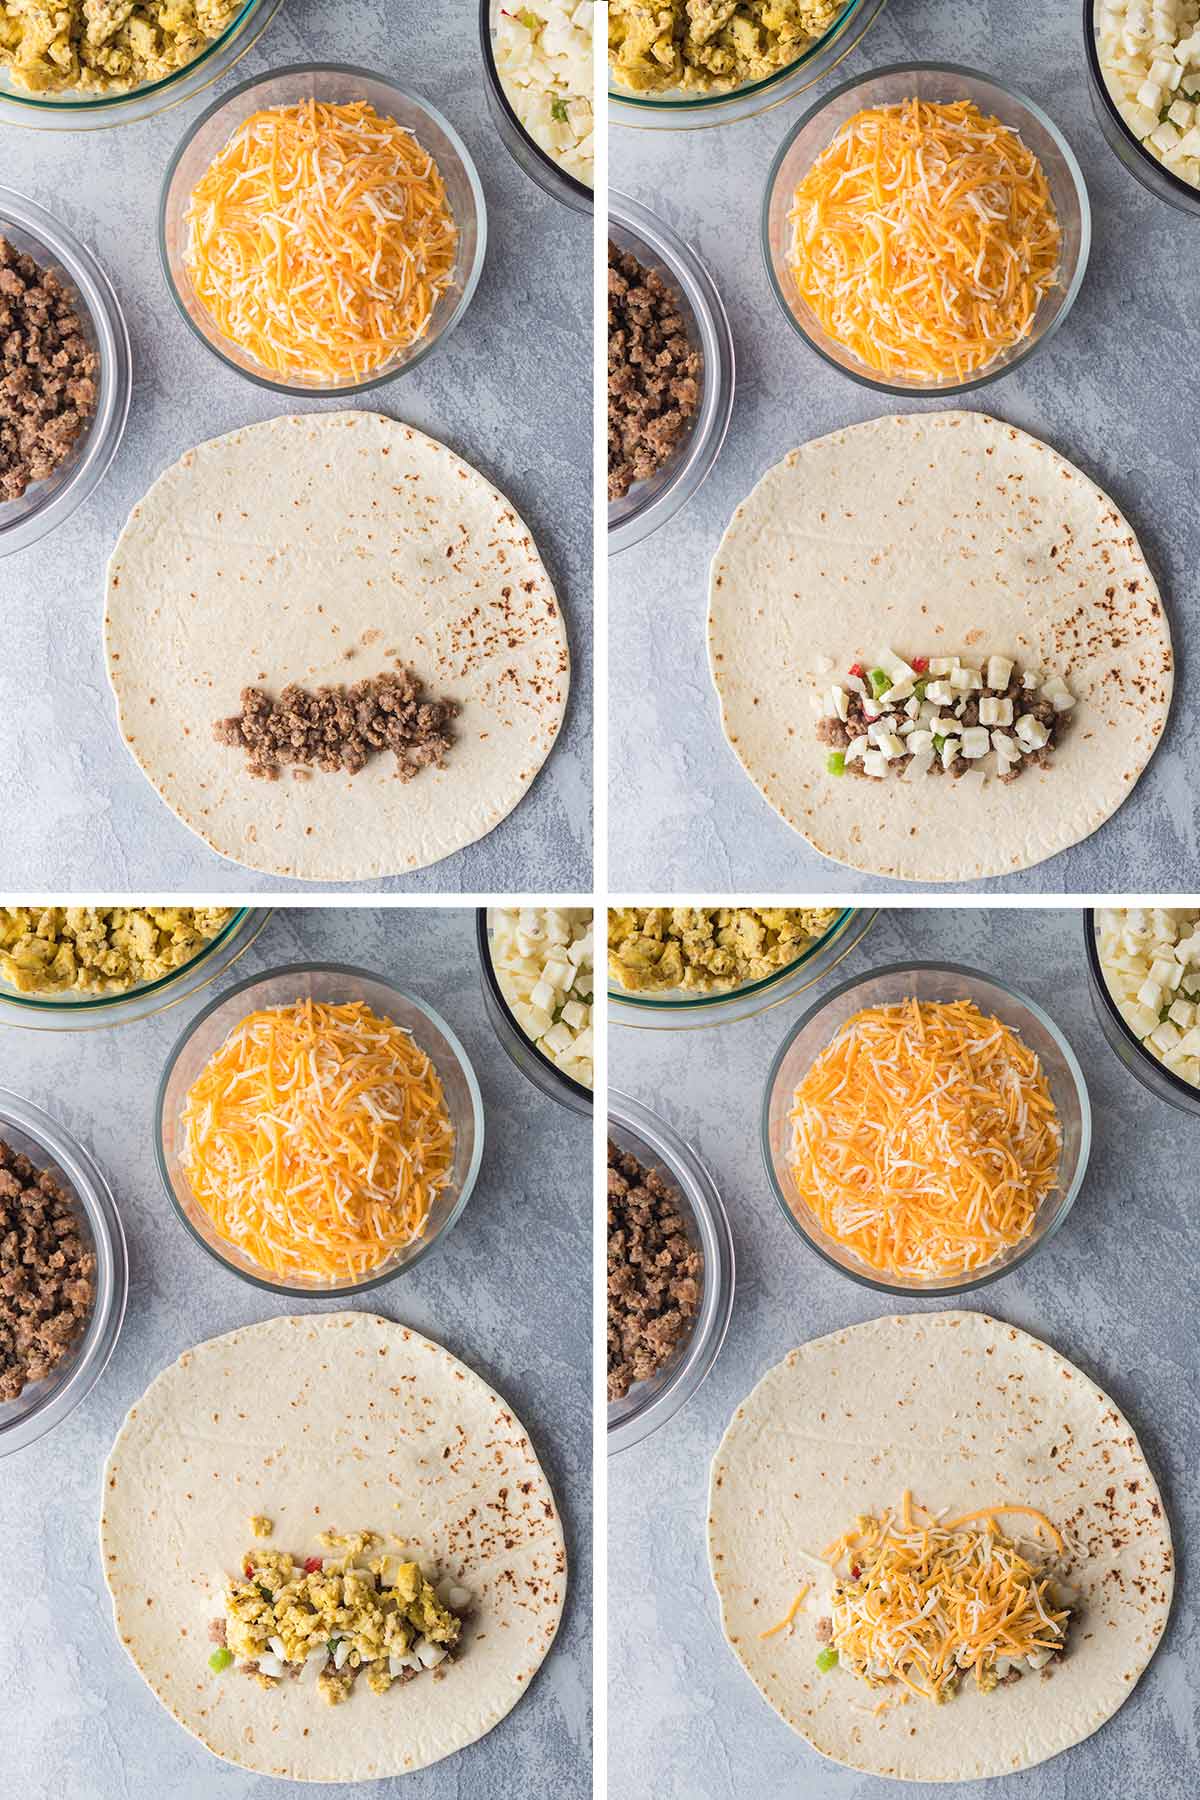 Collage of photos showing the steps of layering filling ingredients to make a freezer breakfast burrito.